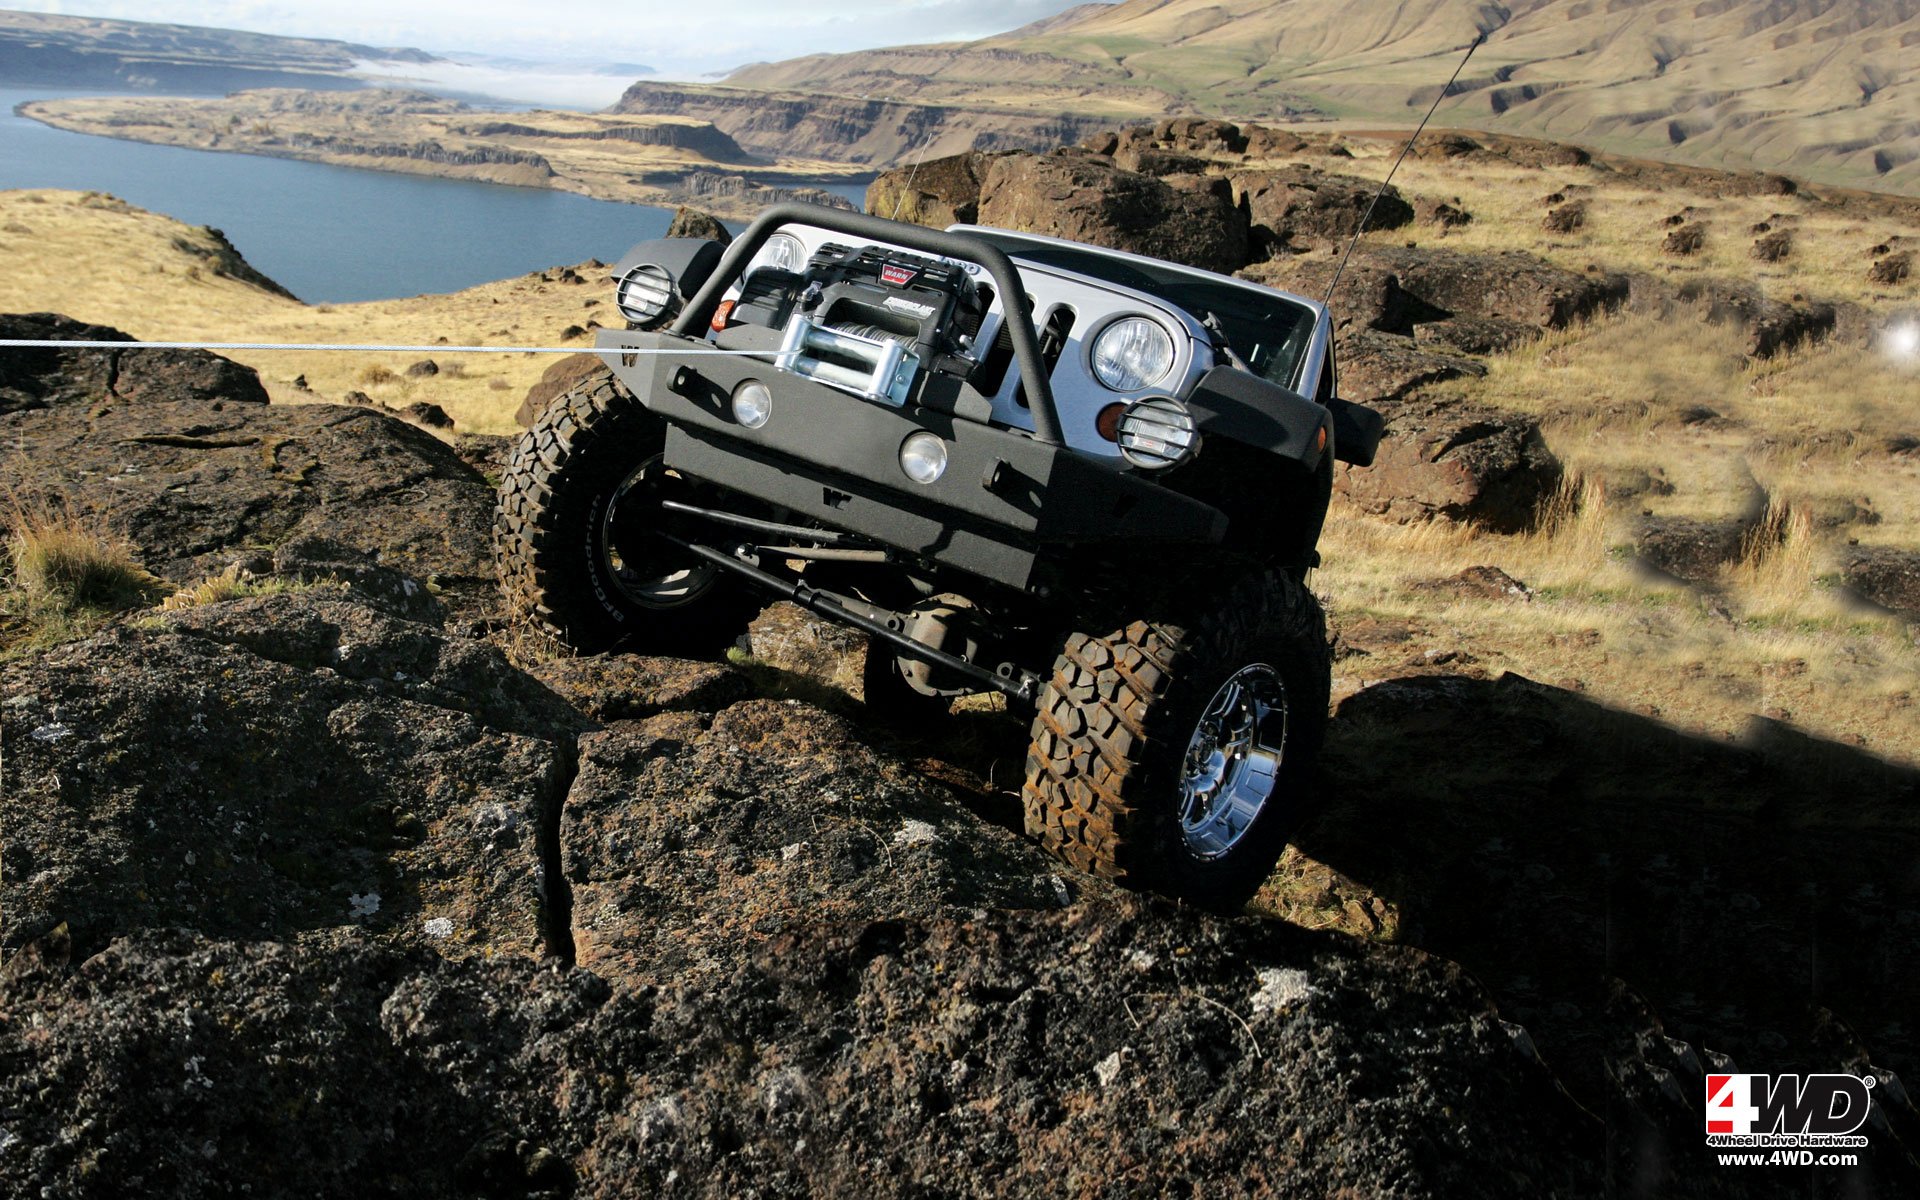 Free Jeep Wallpapers Jeep Images   High Resolution Desktop Pictures